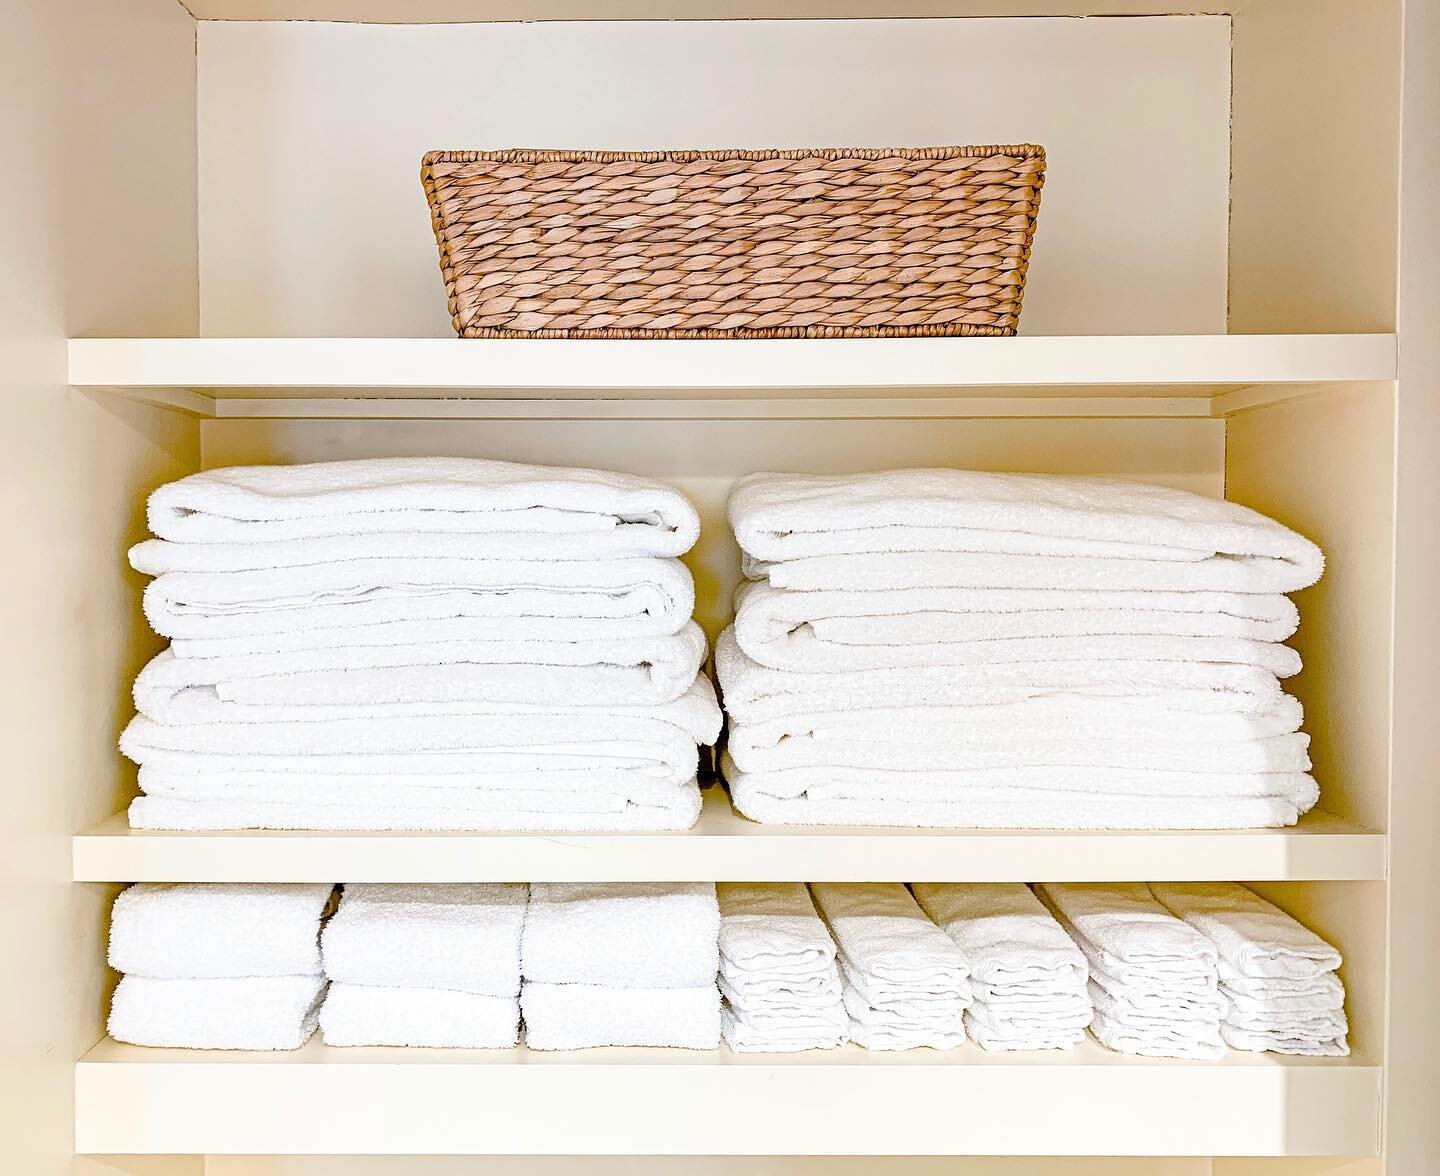 The soothing effects of white, fluffy towels 🤍 
.
.
Follow @bhomeproorganizing 
for more Organizing ideas to maximize your home life.
.
.
.
#bhomeproorganizing #professionalorganizer
#professionalorganizerny #ny #uppereastside #manhattan
#organized
